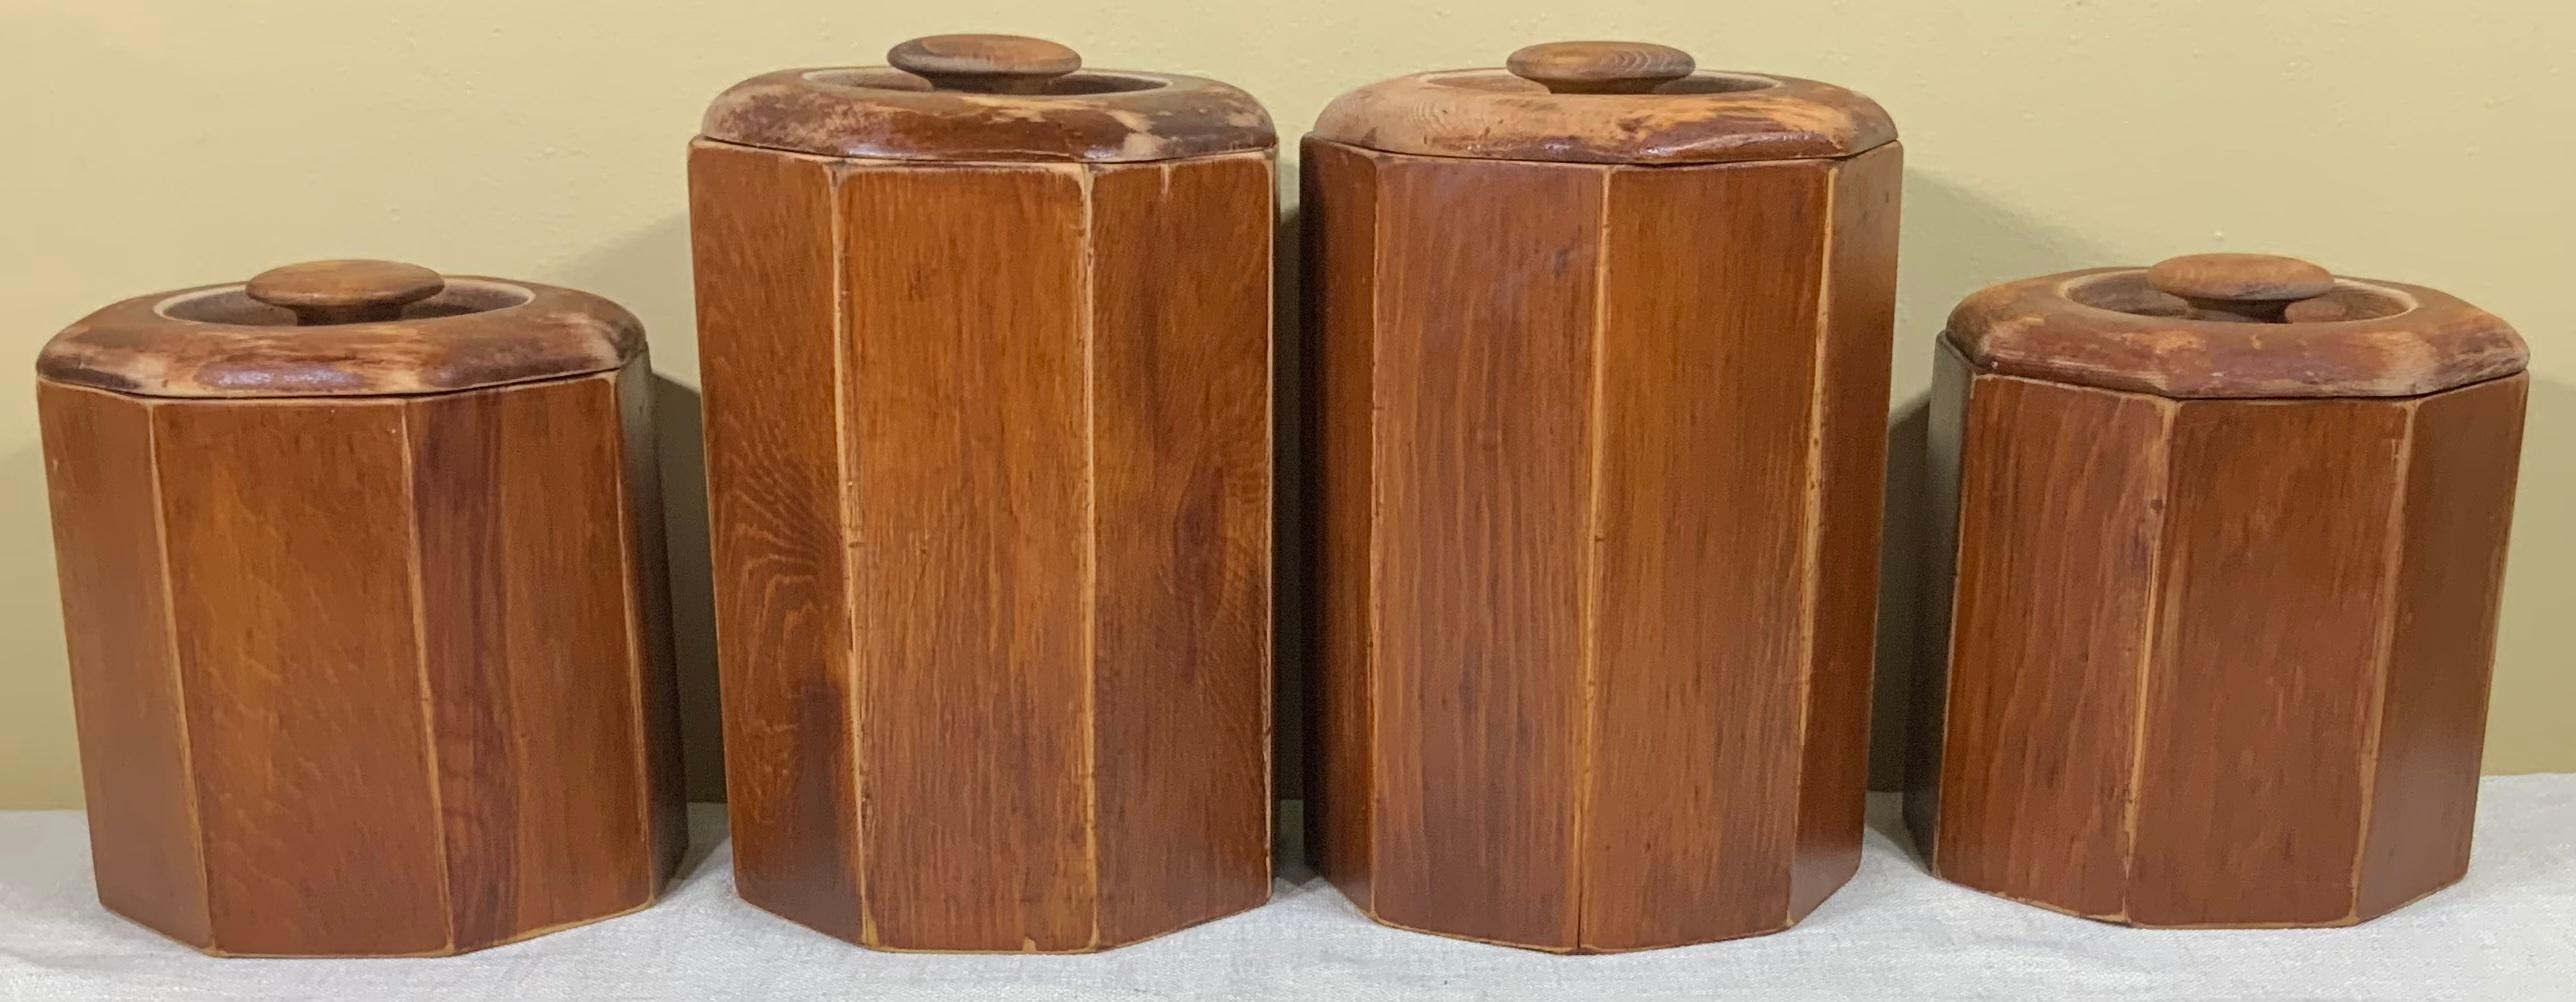 Mid-20th Century Set of Four, Coffee Tea, Sugar and Flour Dispensers For Sale